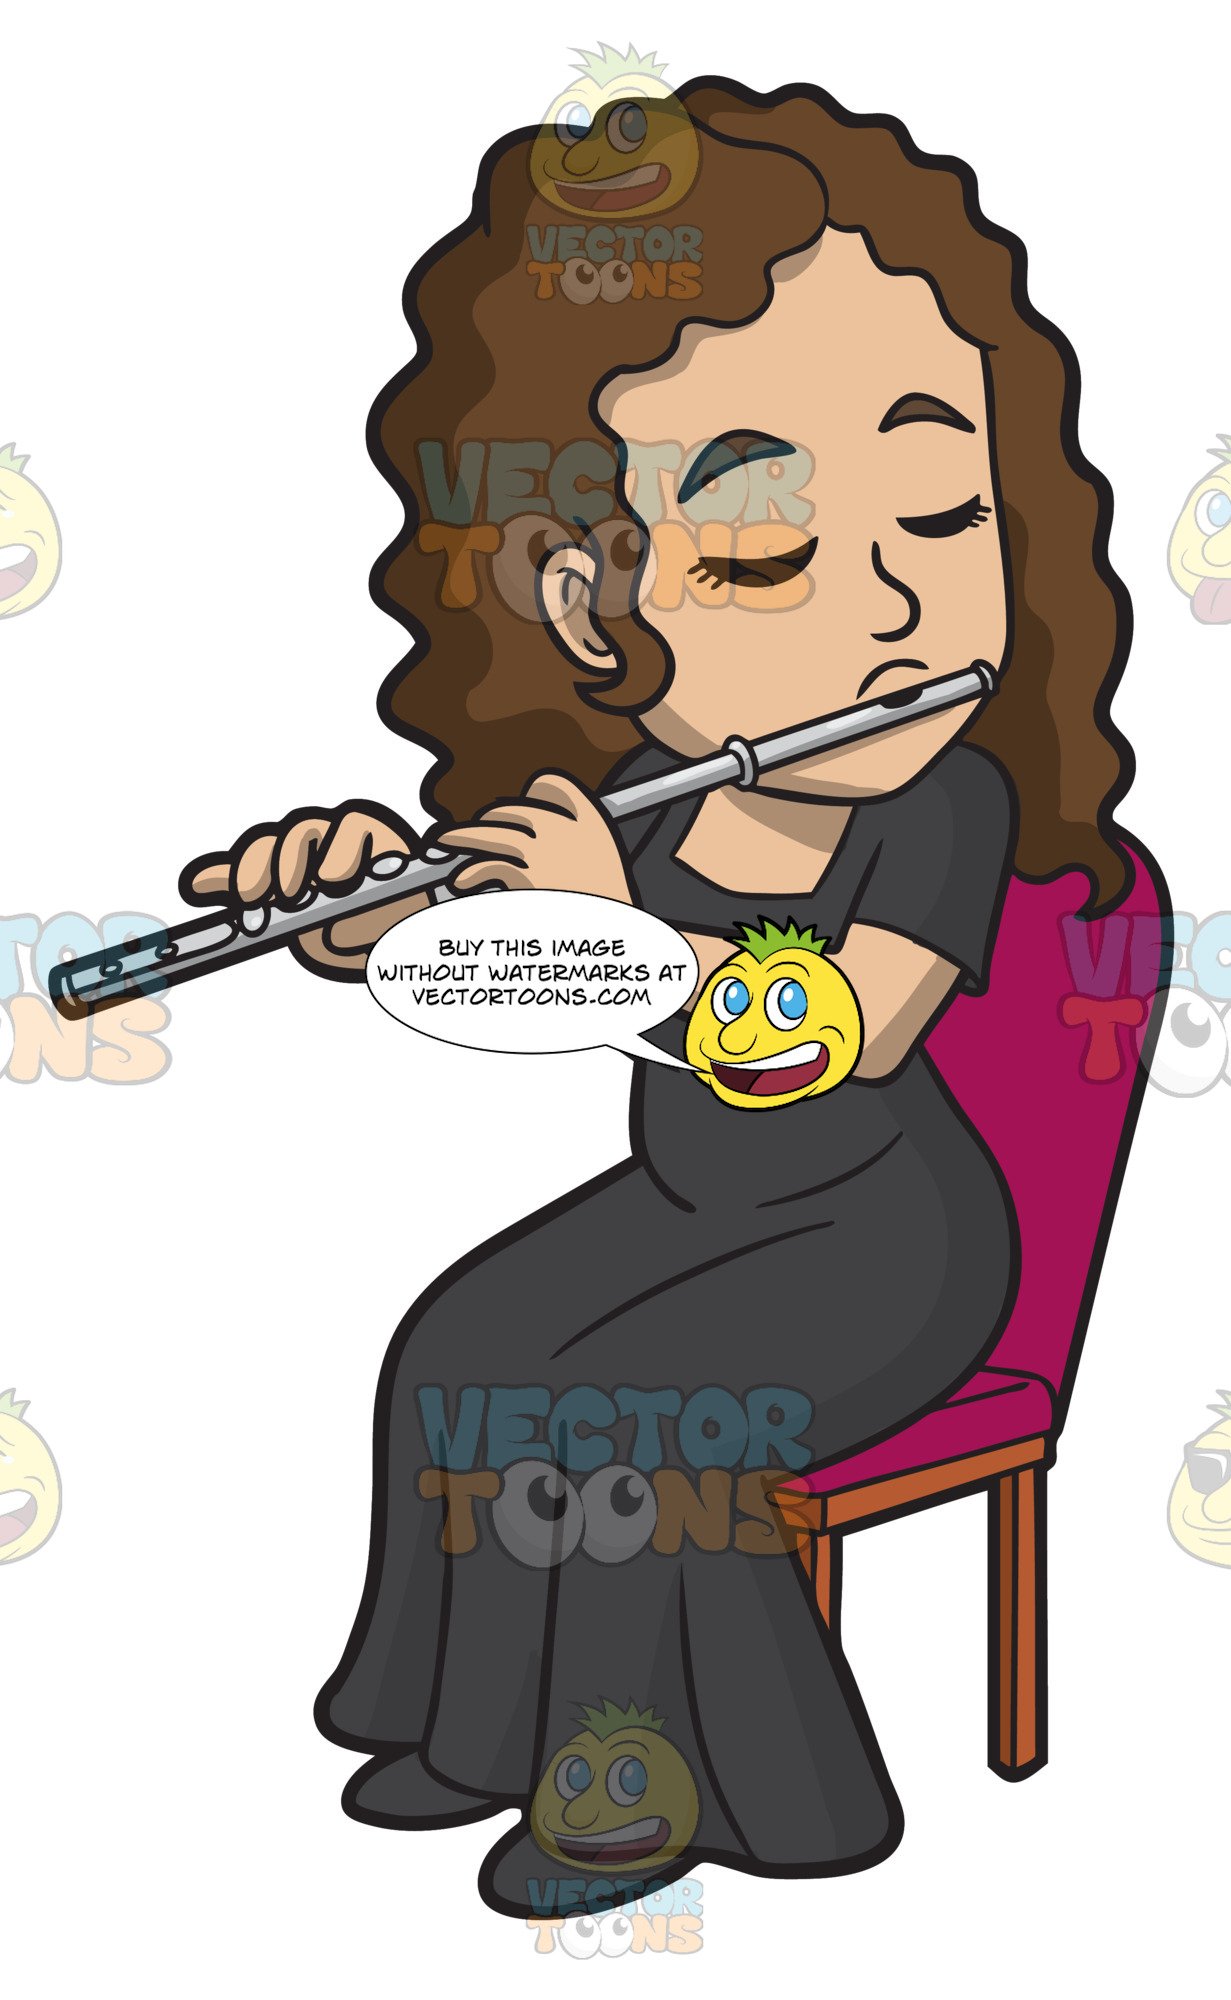 flute clipart orchestra